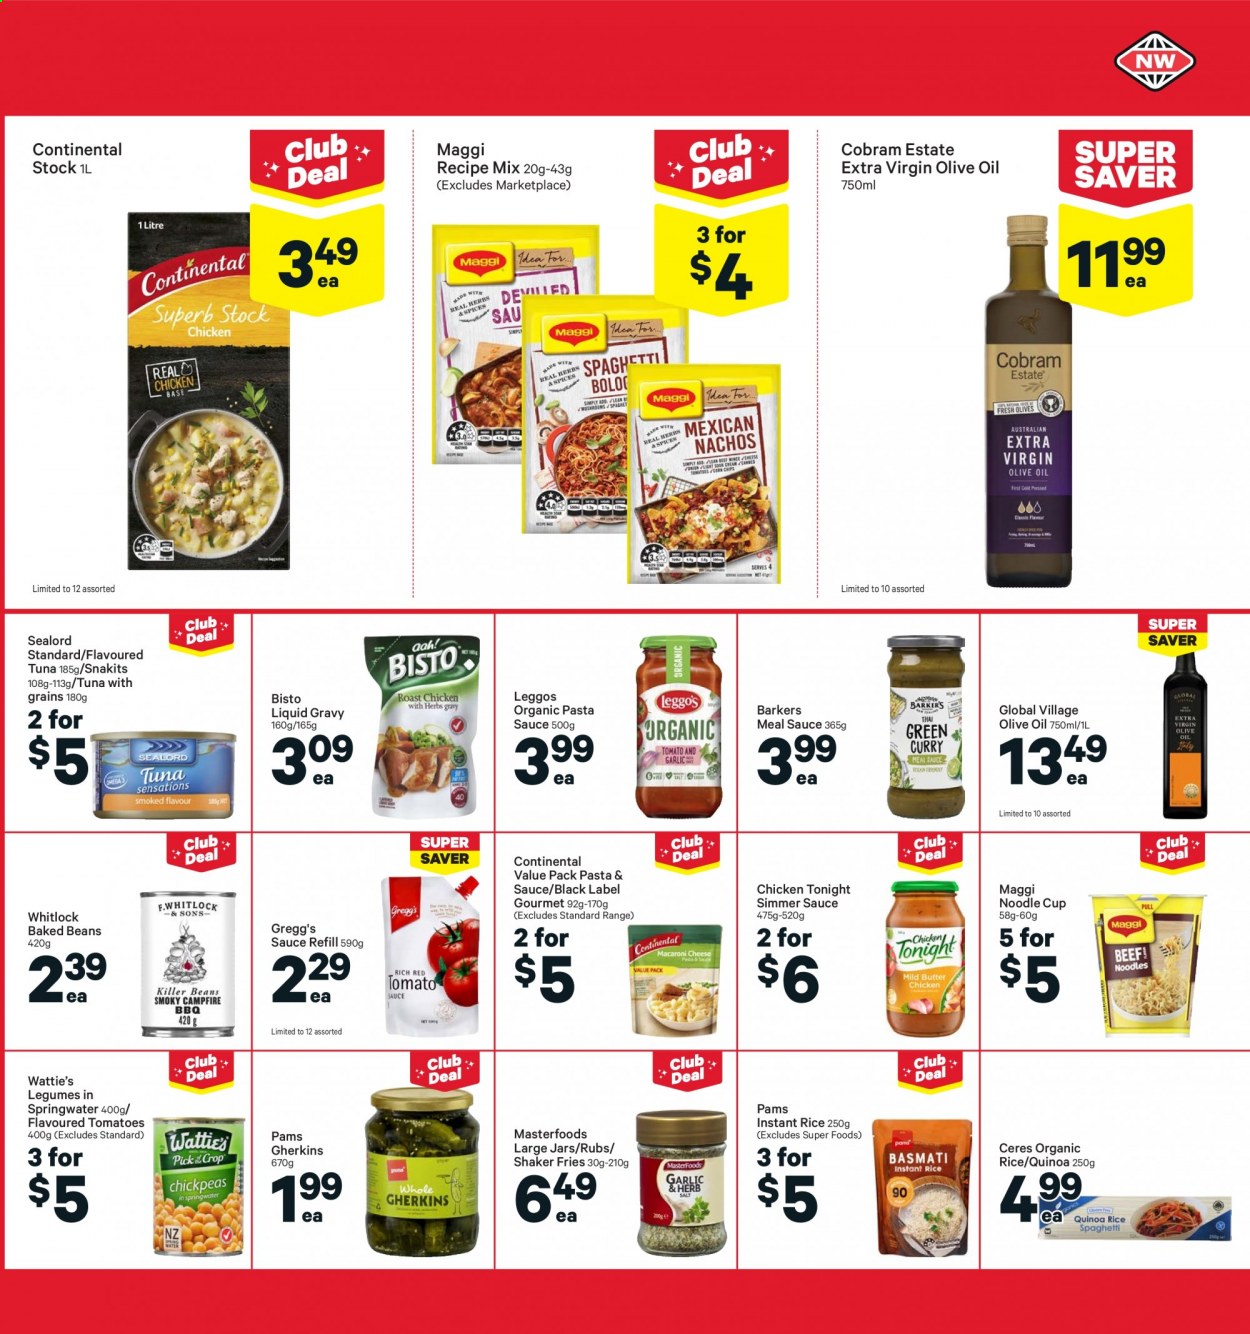 thumbnail - New World mailer - 02.08.2021 - 08.08.2021 - Sales products - beans, tomatoes, tuna, Sealord, pasta sauce, noodles, Wattie's, Continental, potato fries, Maggi, baked beans, quinoa, rice, extra virgin olive oil, olive oil, oil, Cerés. Page 21.